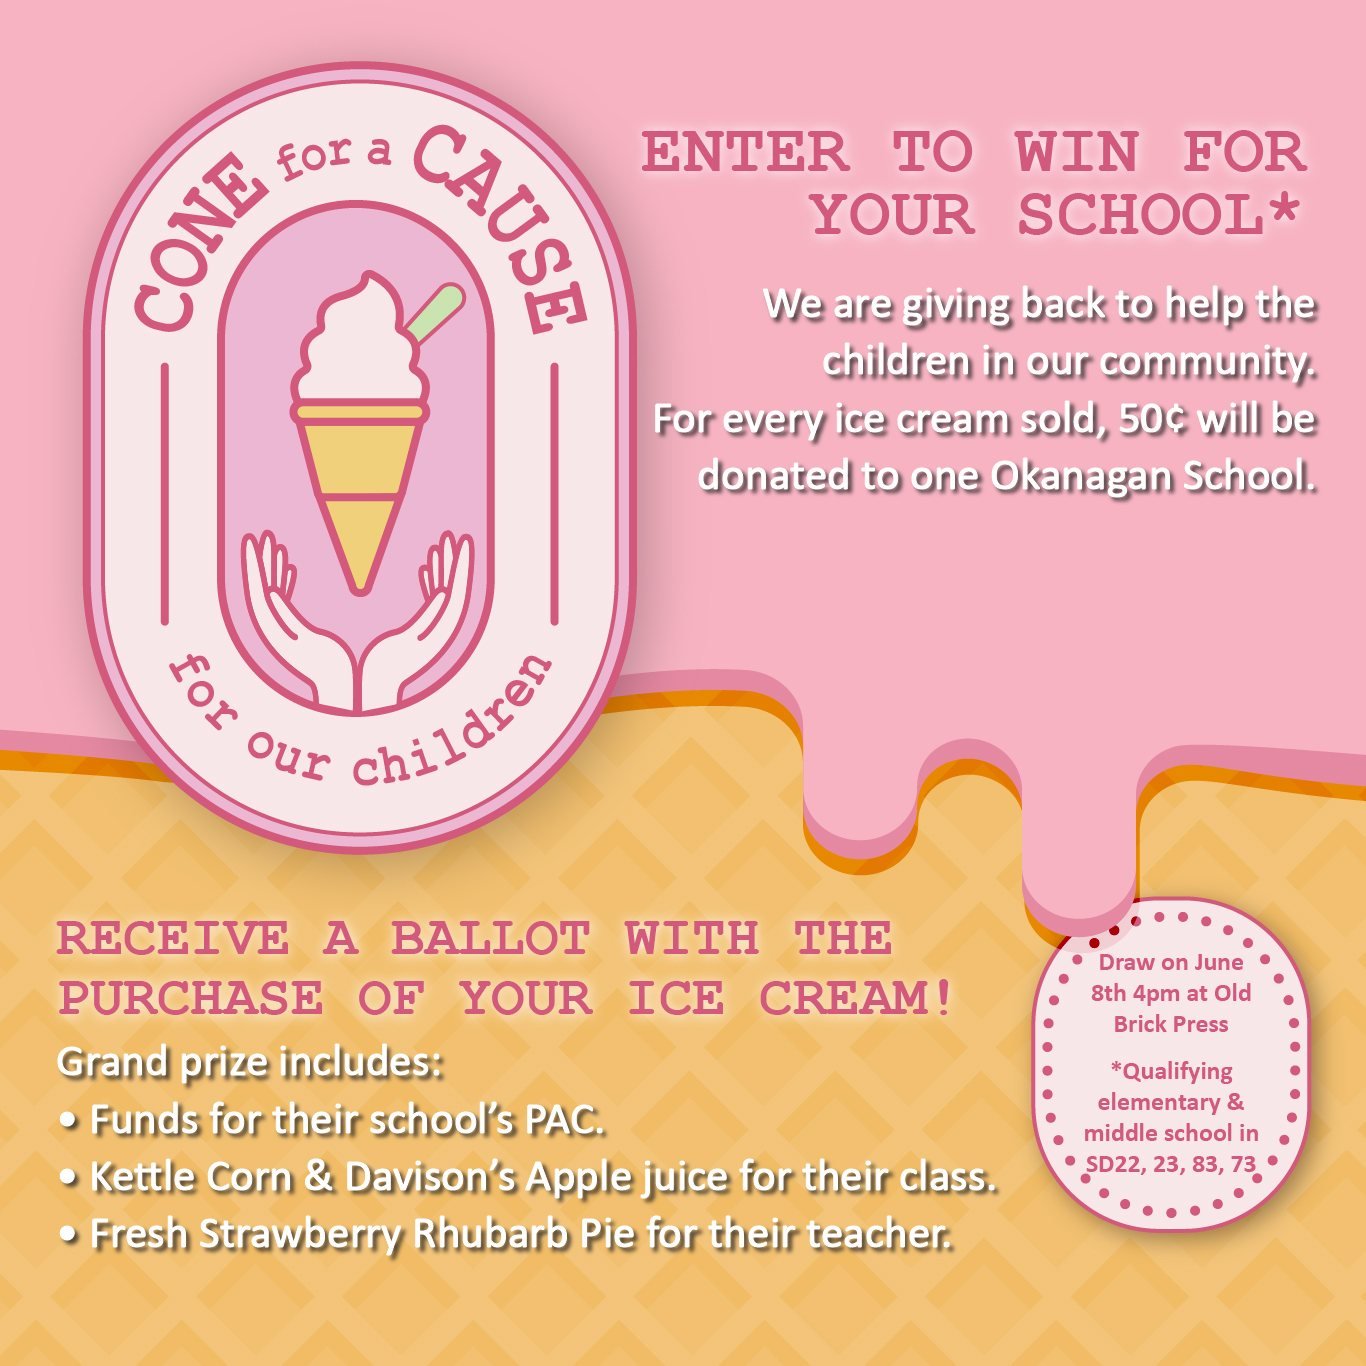 Just like last year, we are launching again the Cone for a Cause Program. 

From every Real Fruit ice-cream cone purchased we donate $0.50 to a school in our region. The school will be selected by a draw on June 8th at 4pm.

If you want your child's 